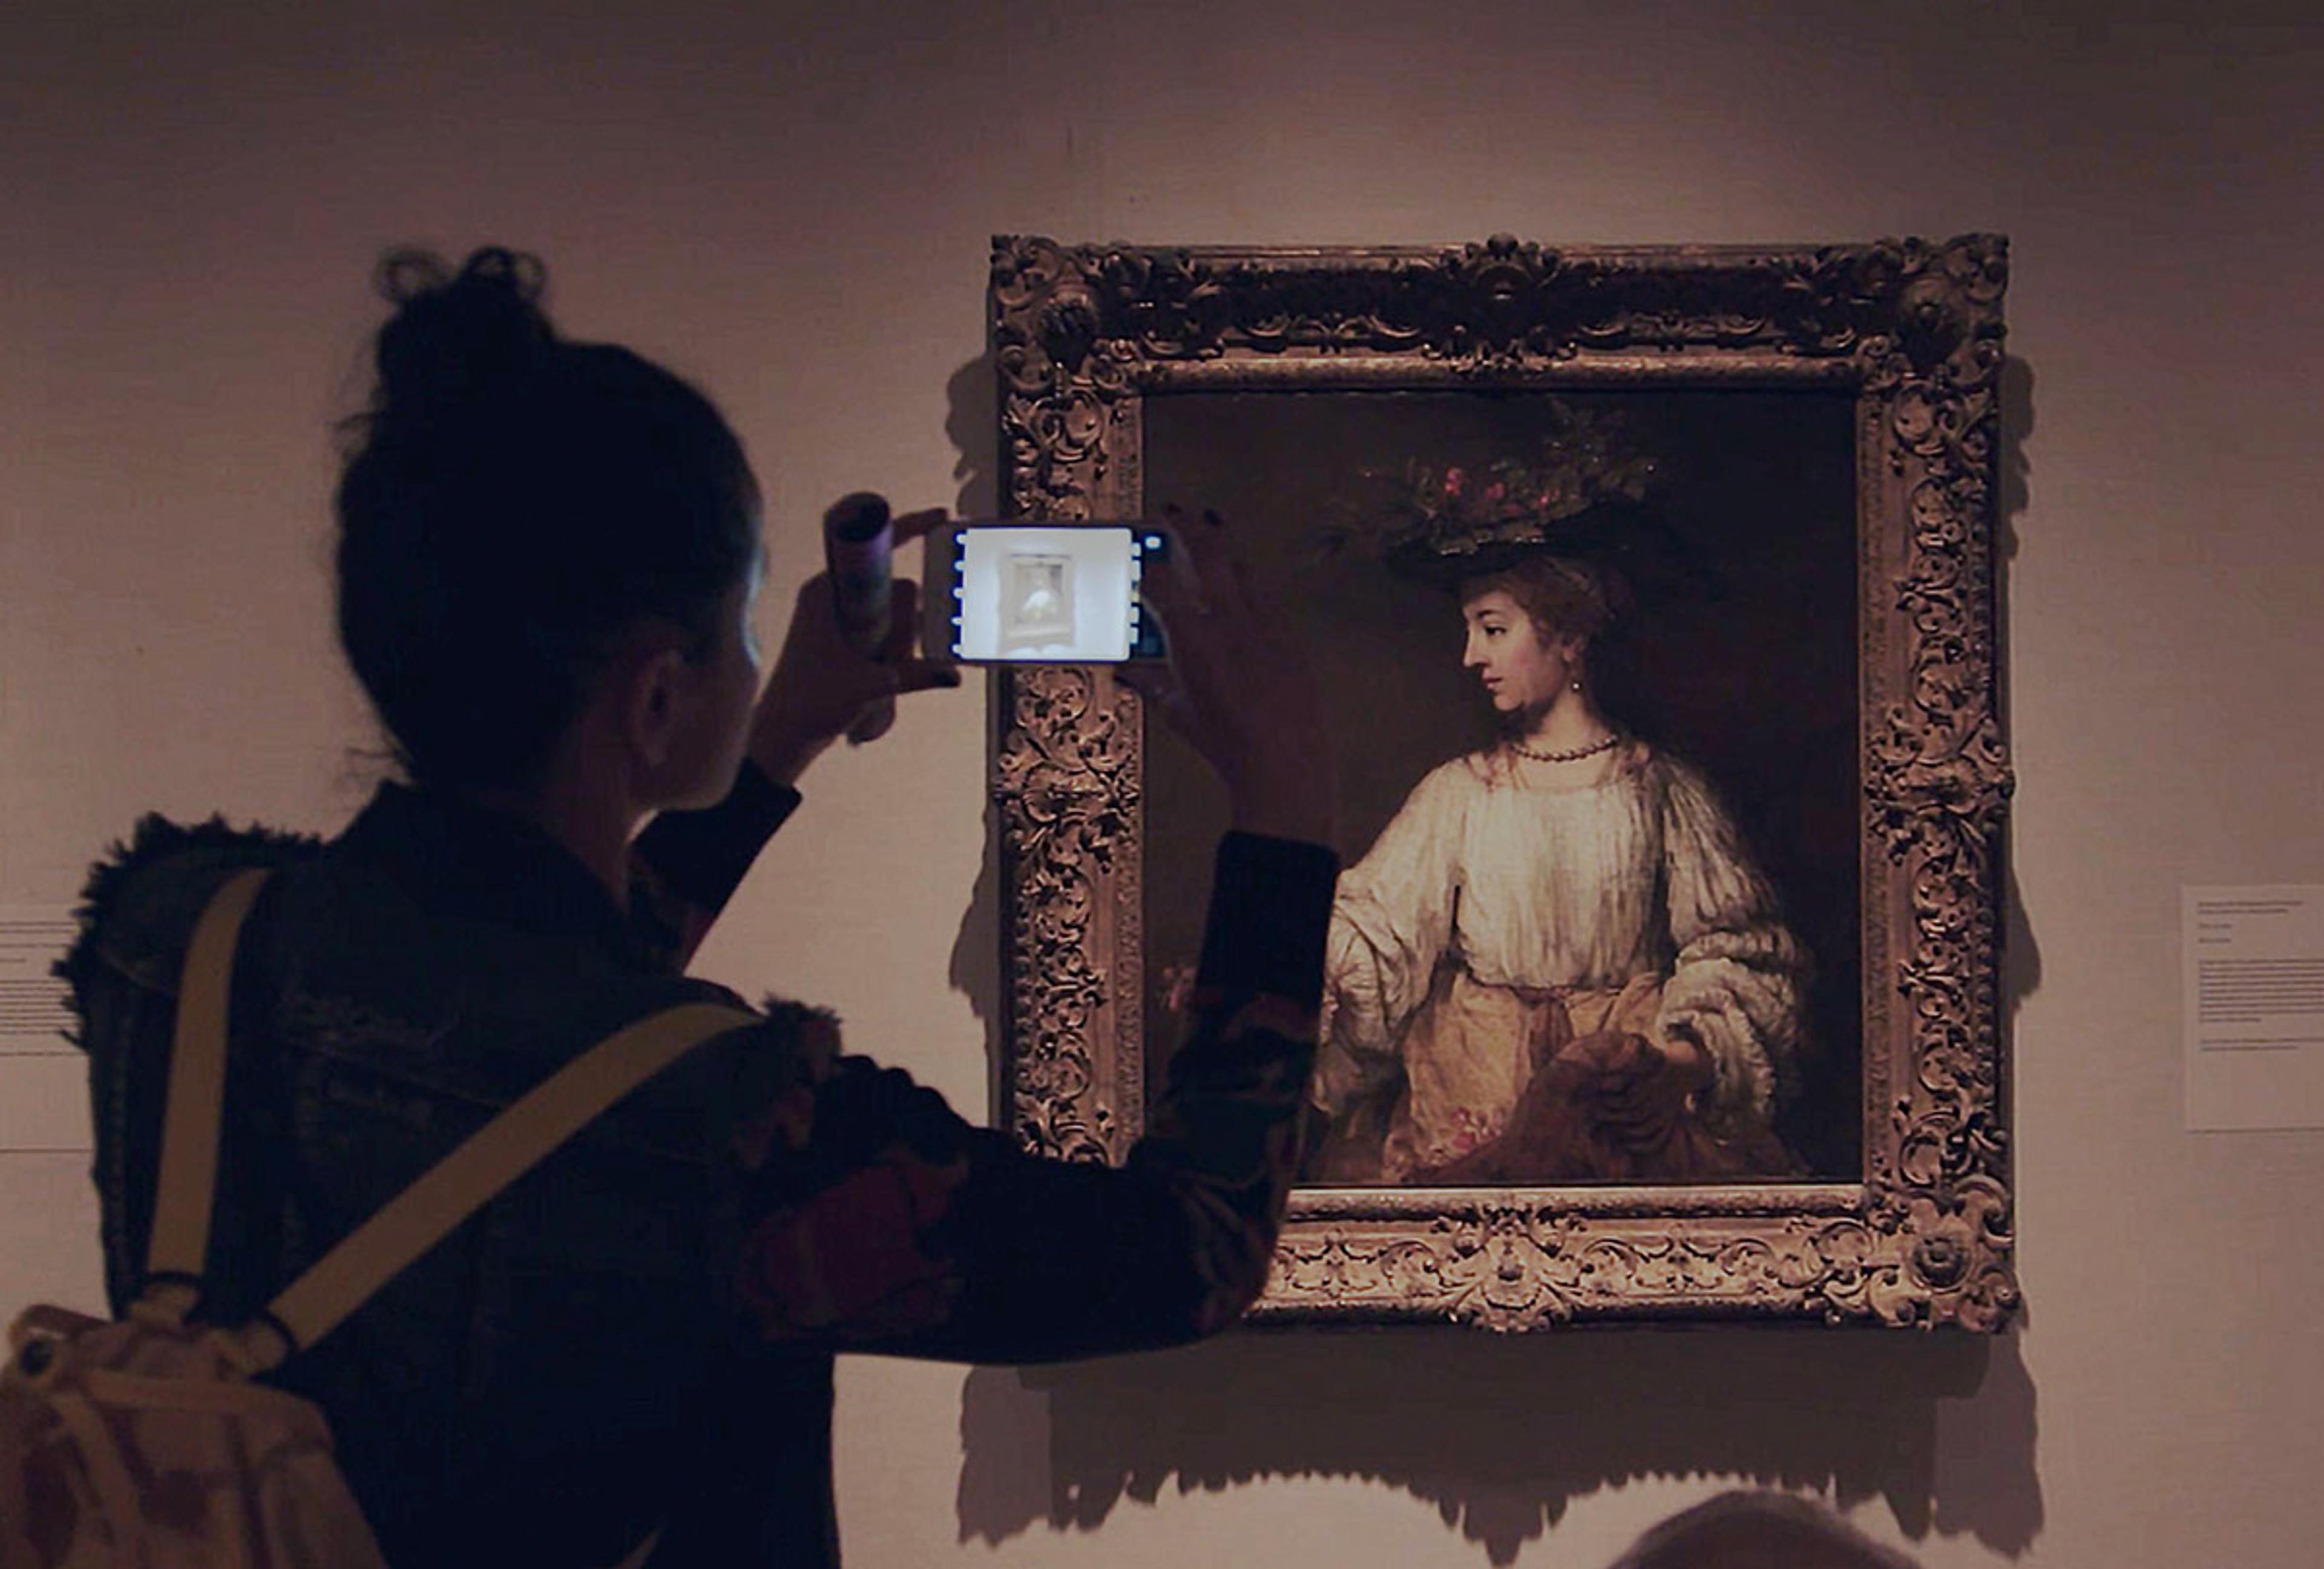 A woman holds up her phone to take a photo of a painting.